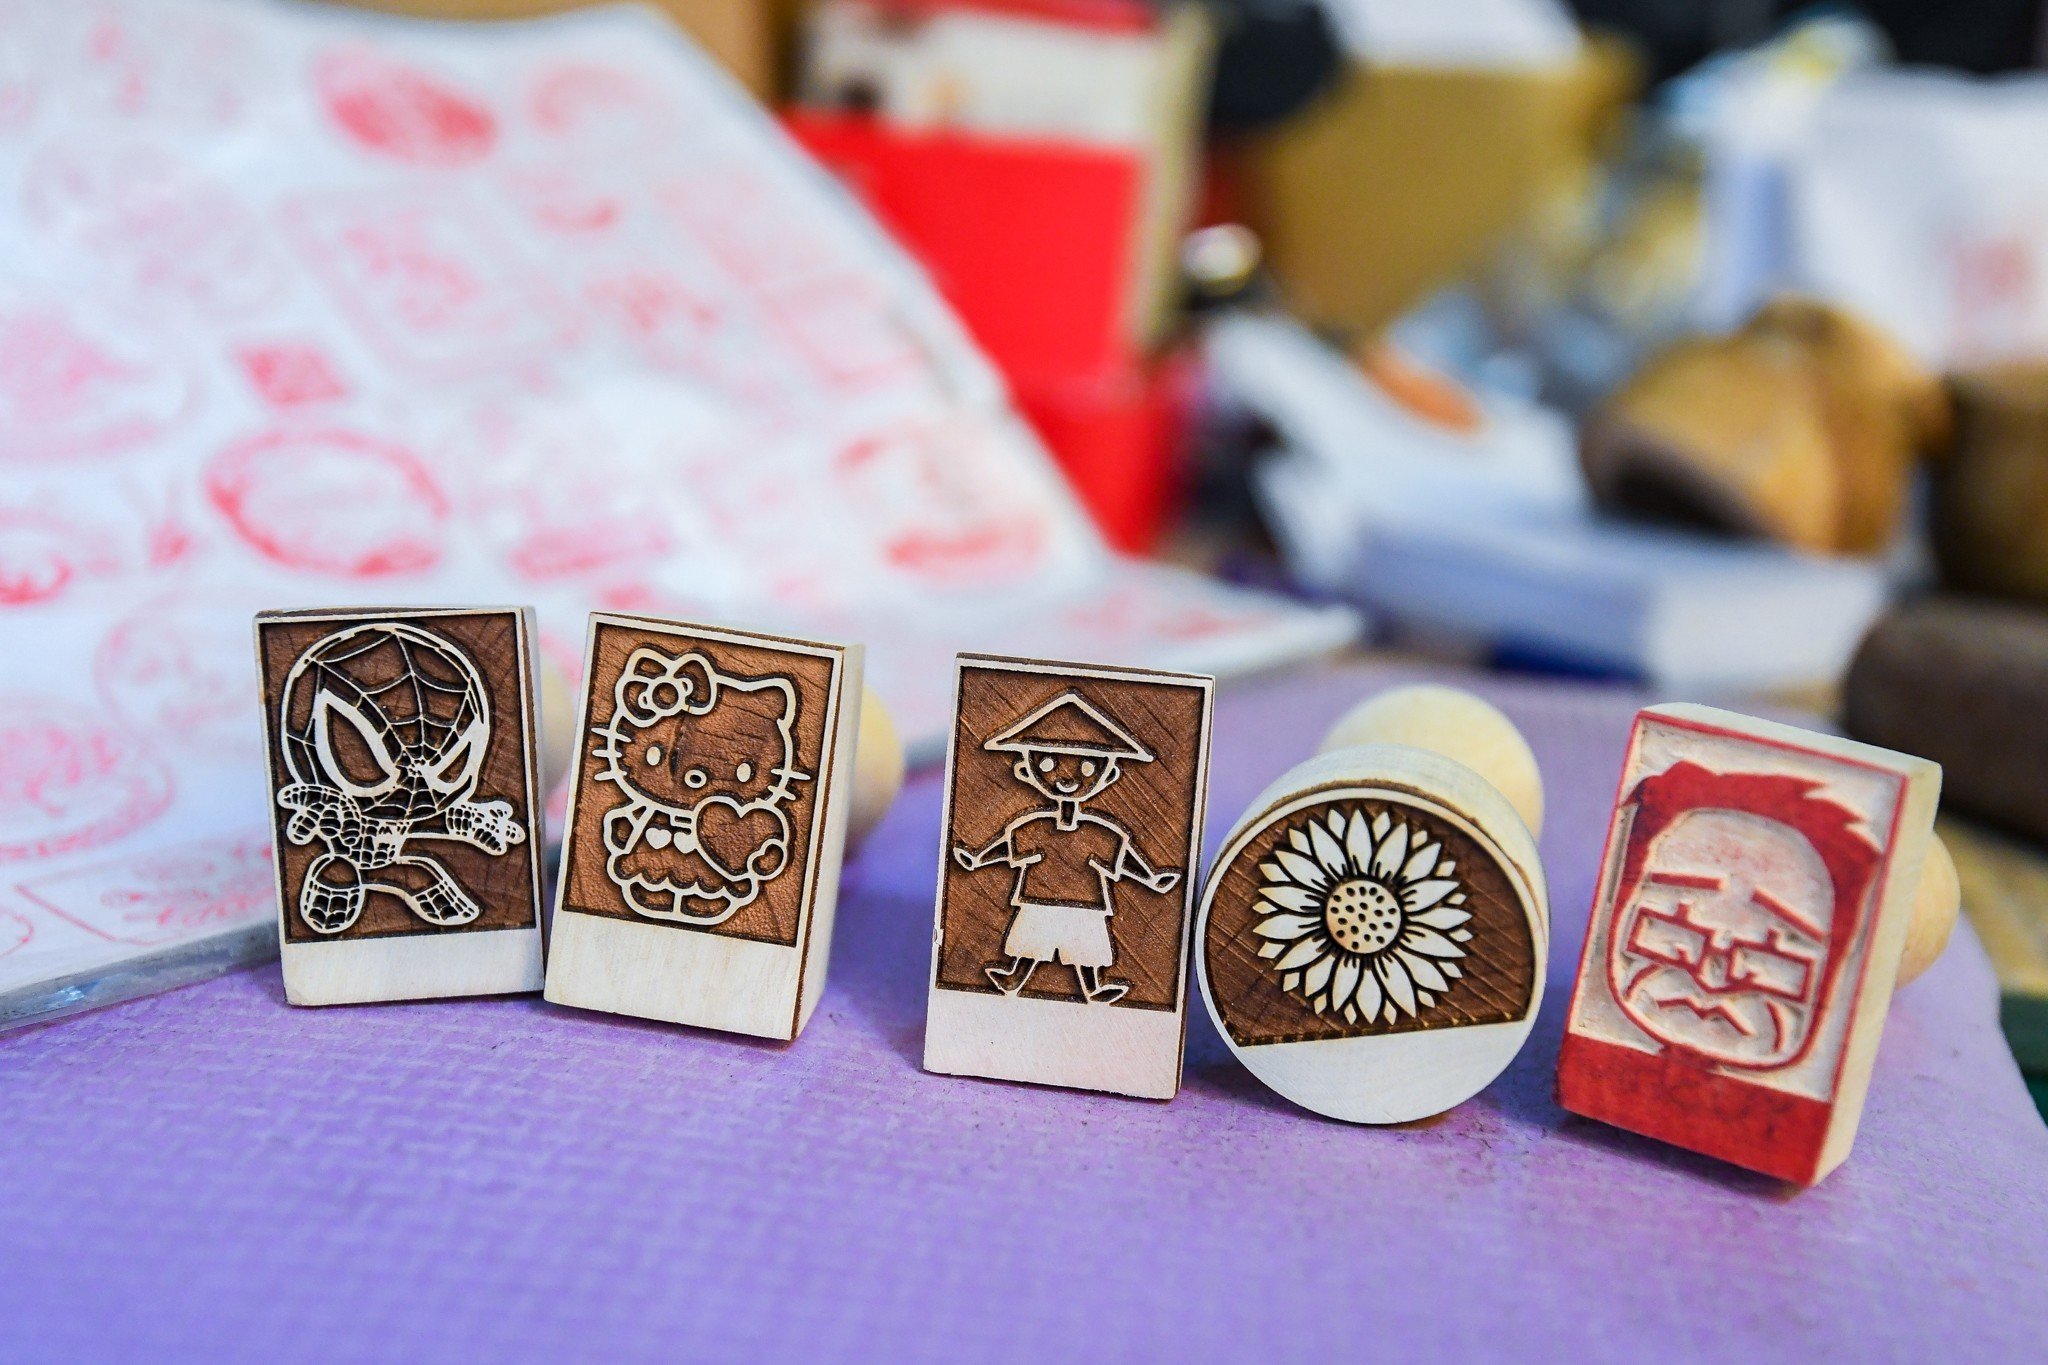 Wooden stamps are available at Pham Ngoc Toan's shop. Photo: Nam Tran / Tuoi Tre News